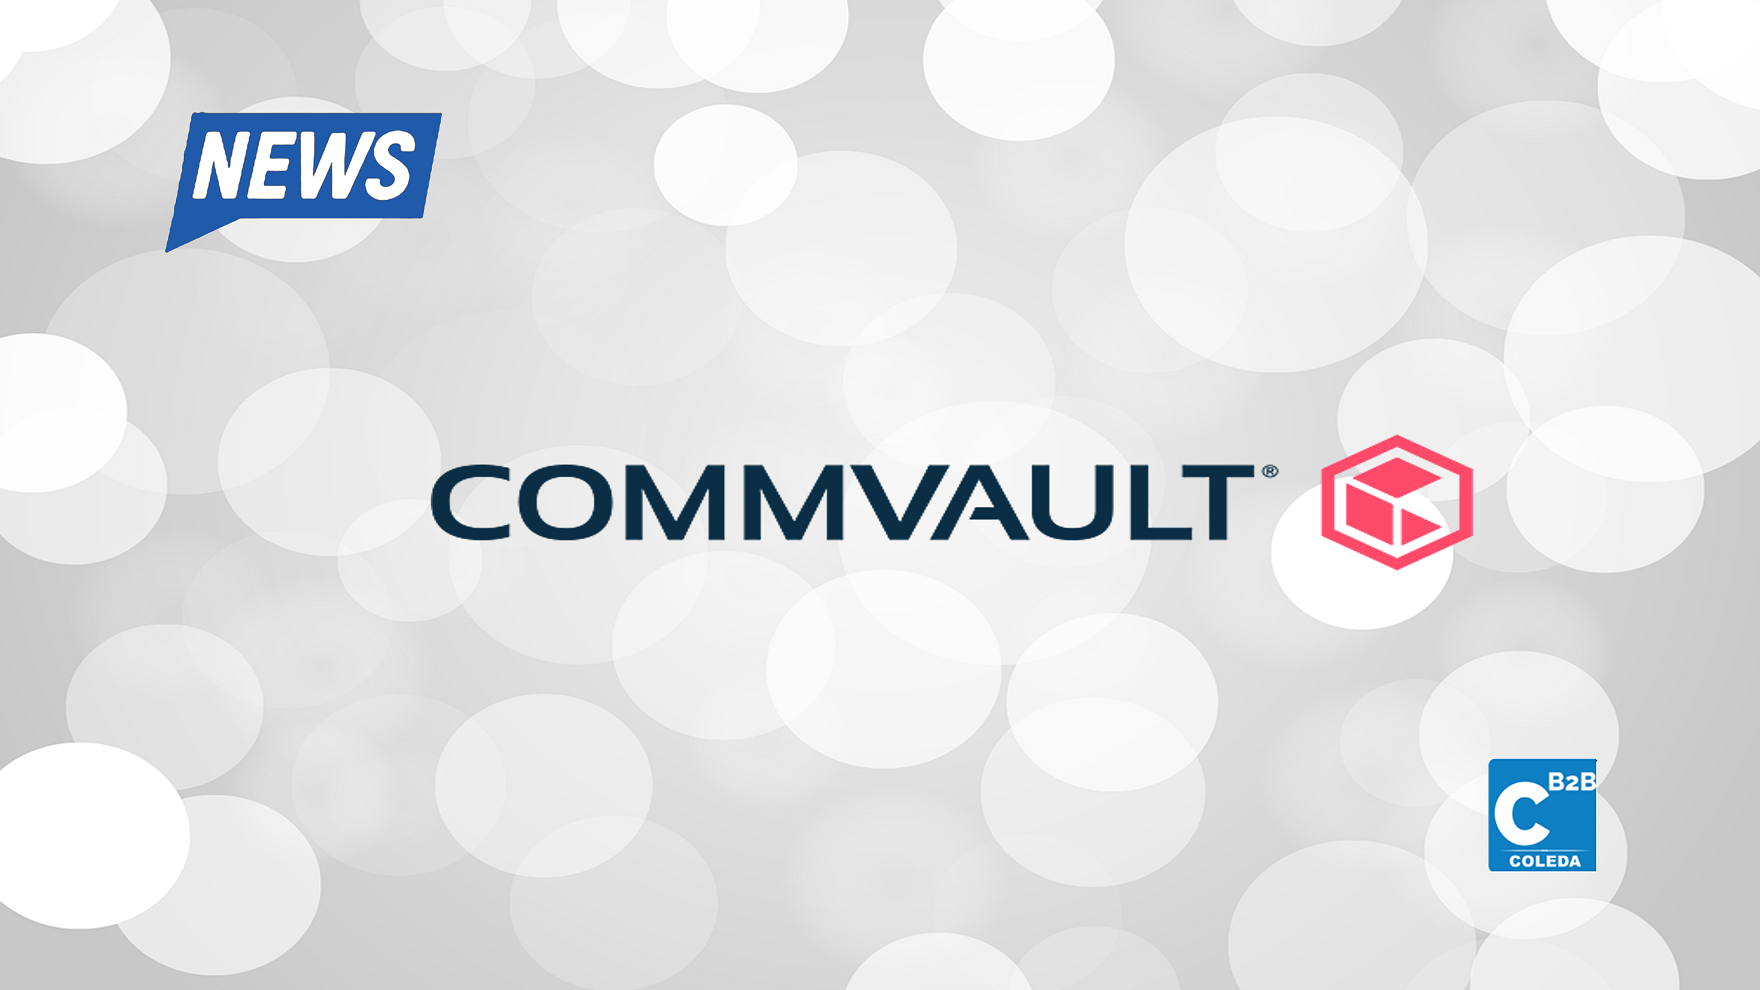 Commvault gets named as a leader in the GigaOm Radar for Kubernets Data Protection